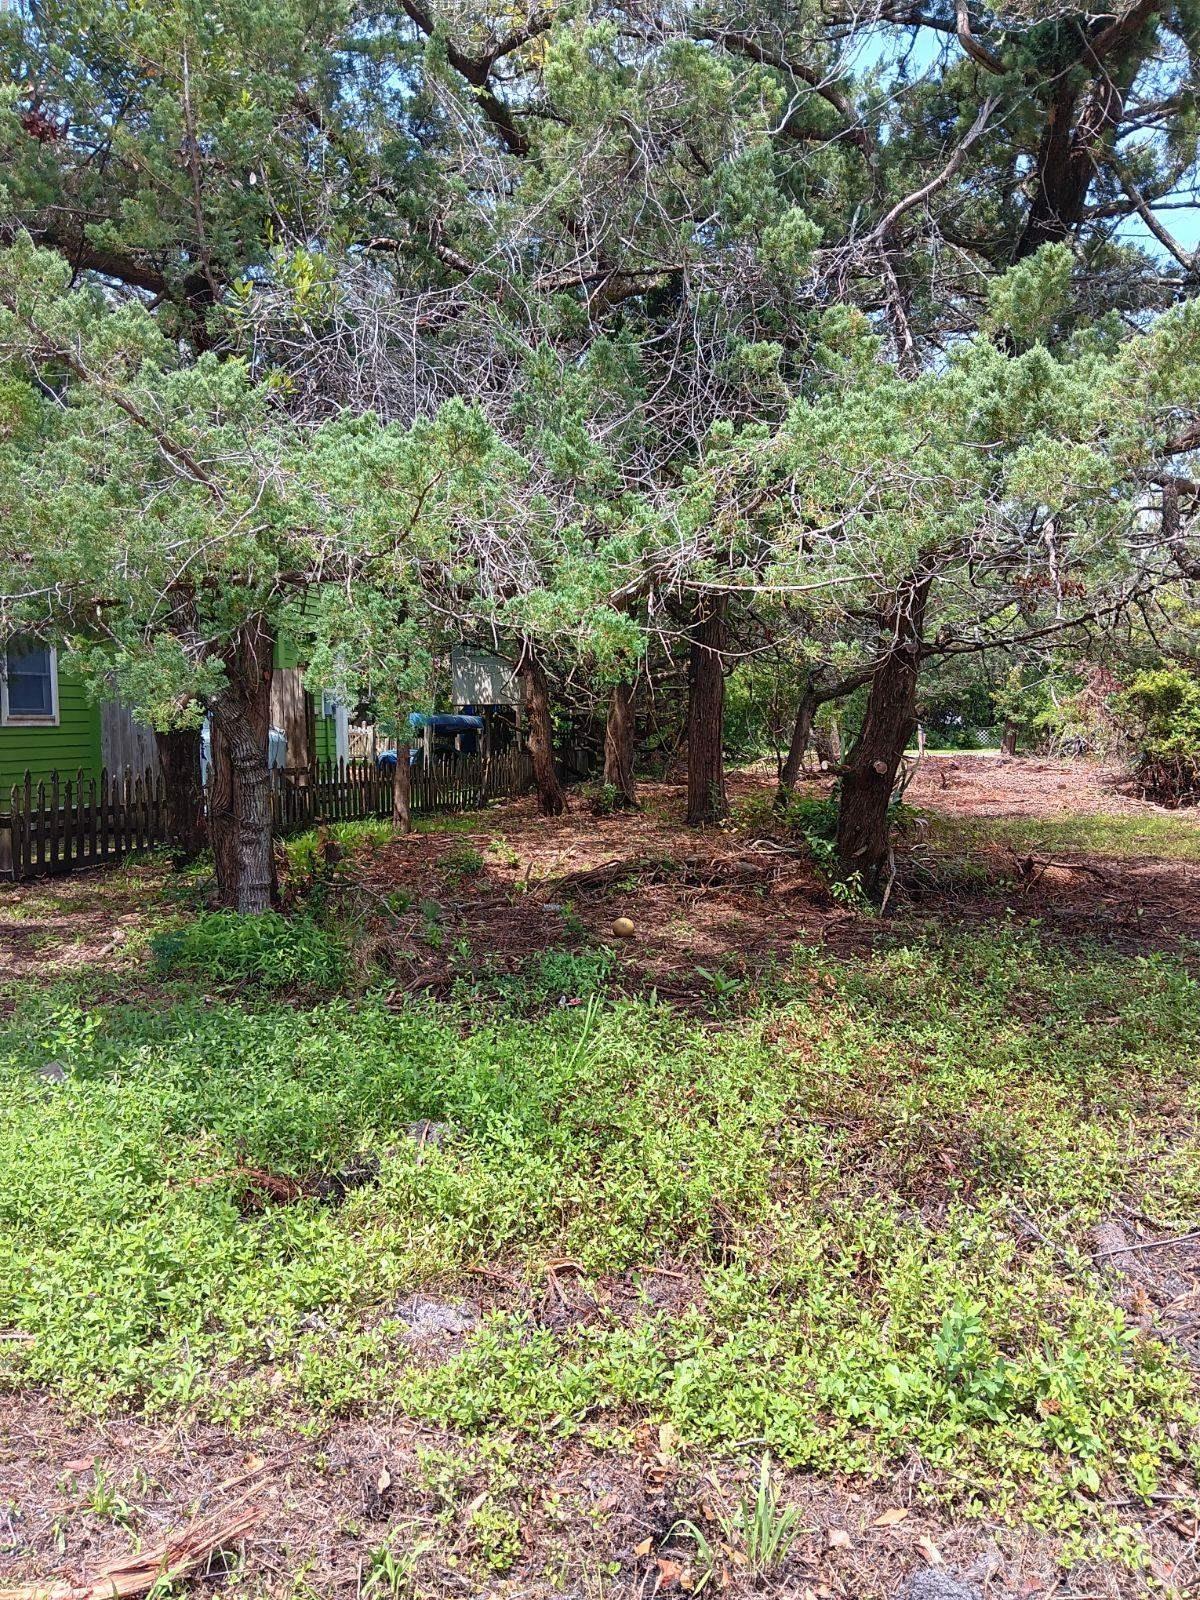 The perfect lot in the Friendly Ocracoke Ridge subdivision (with access from both Sunset Dr and Cabana Dr.) for an RV or trailer, or to build a primary, 2nd or rental home. Located just outside the heart of the village, yet within walking & biking distance to the coffee shop, several restaurants, shopping and Silver Lake Harbor. No restrictive covenants. Municipal water meter available for purchase from the Ocracoke Sanitary District.